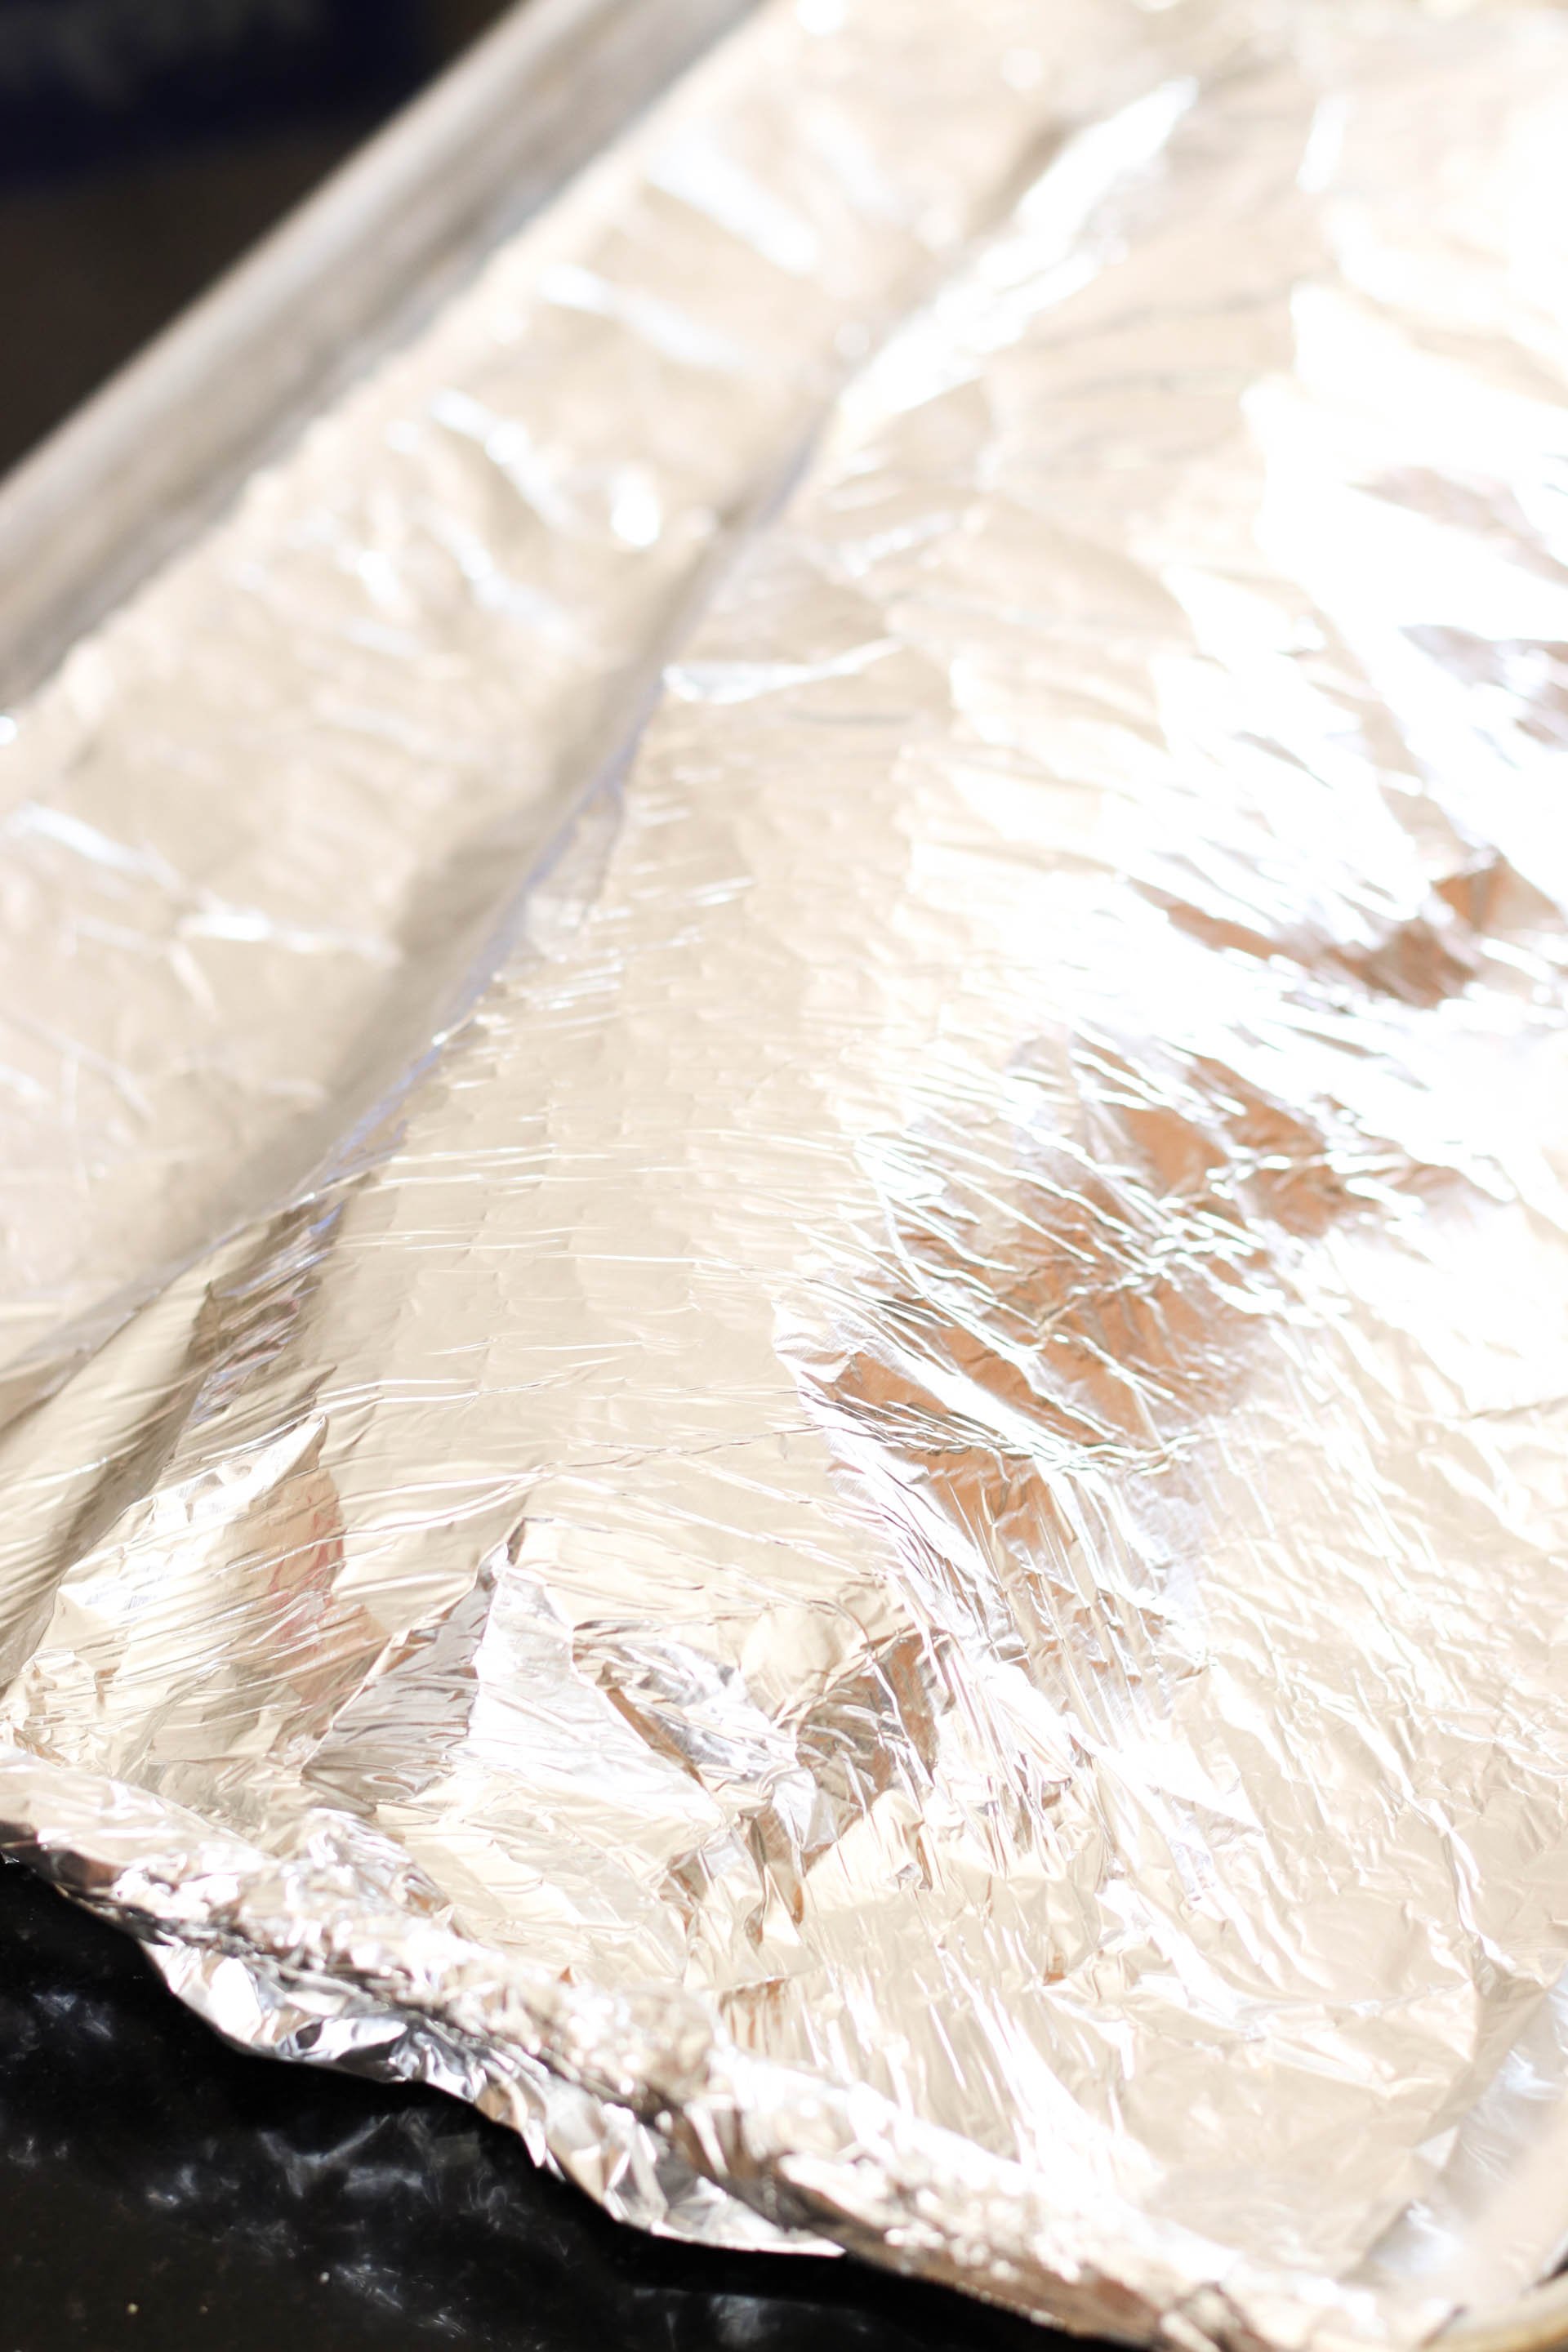 Foil Lined baking sheet with uncooked ribs on them covered with foil